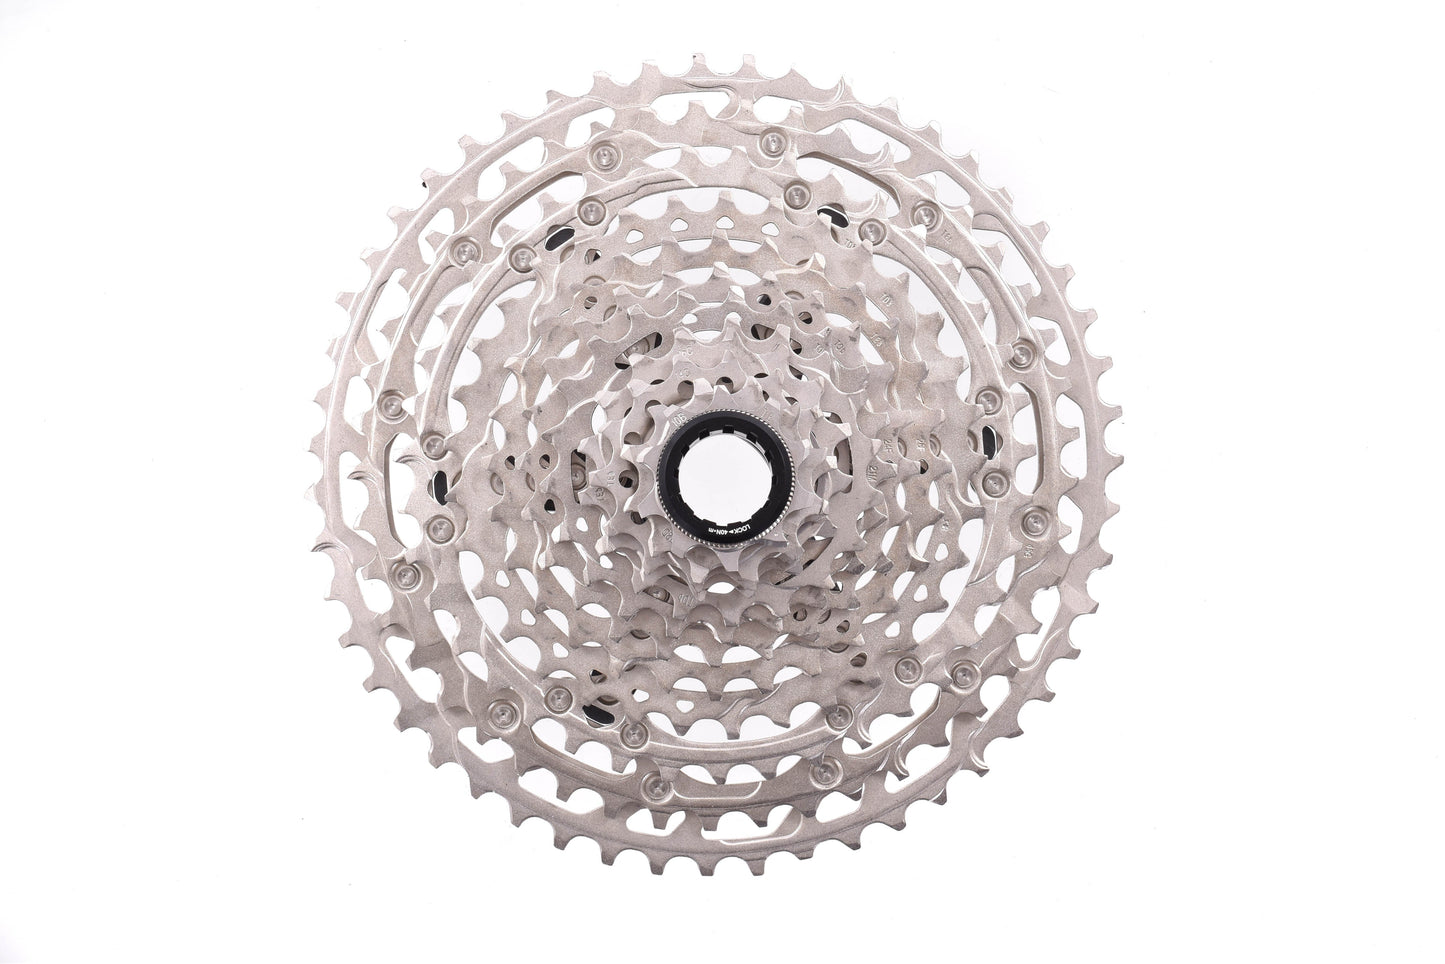 NEW TAKE OFF Shimano Deore CS-M6100-12 Cassette - 12-Speed, 10-51t, Hyperglide+